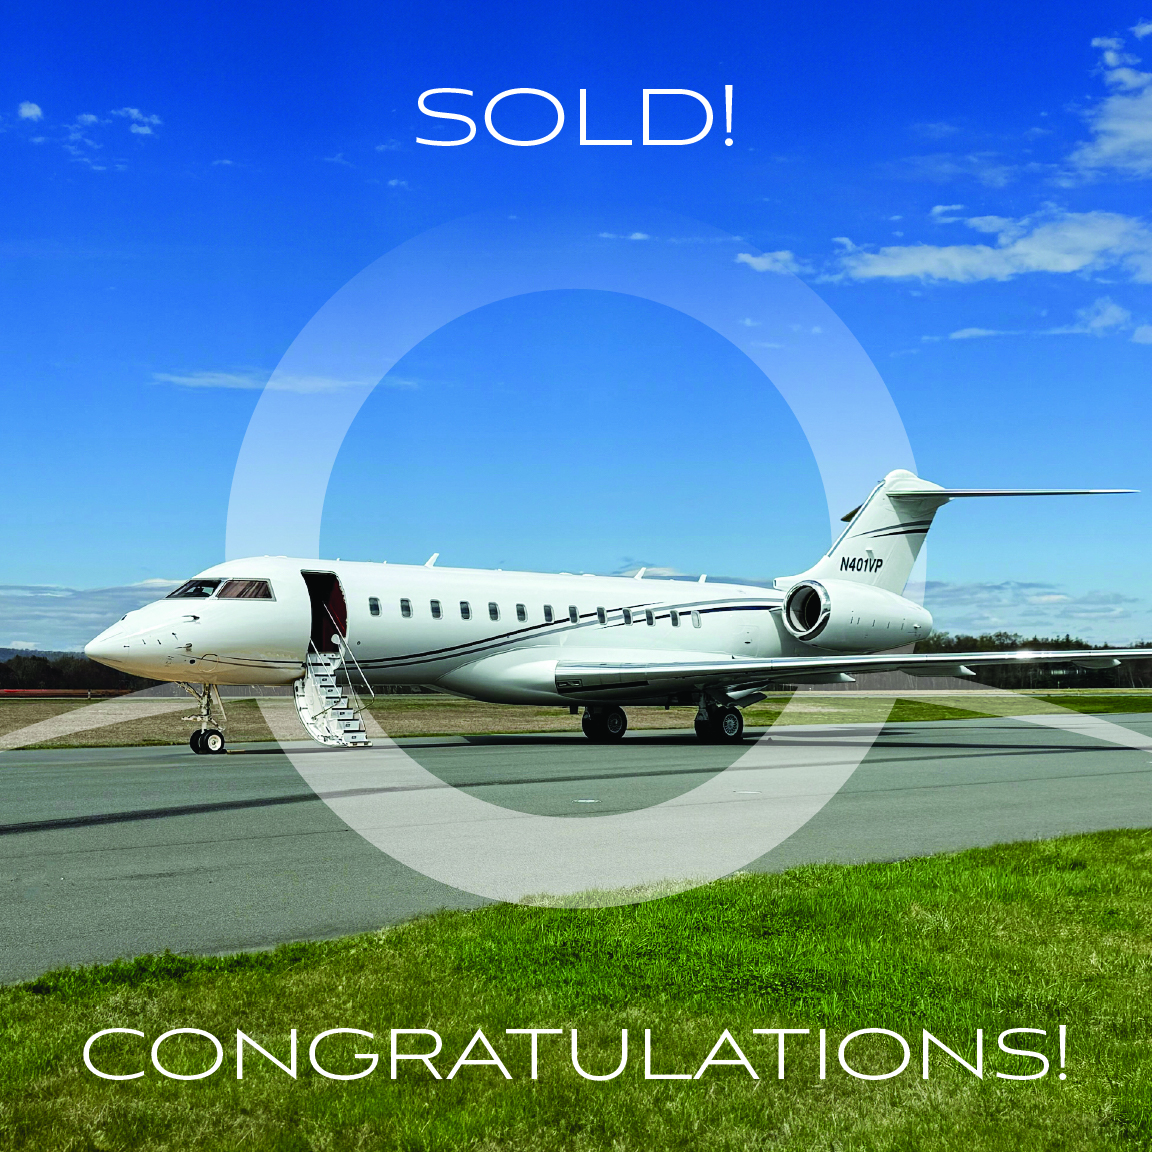 Sold! 🥂

We are glad to have helped facilitate the transaction on this beautiful aircraft! Congratulations to all involved! Blue skies ahead!

#fosteringconfidence #bizav #aircraftsales #sold #closed #global #xrs #brokerage